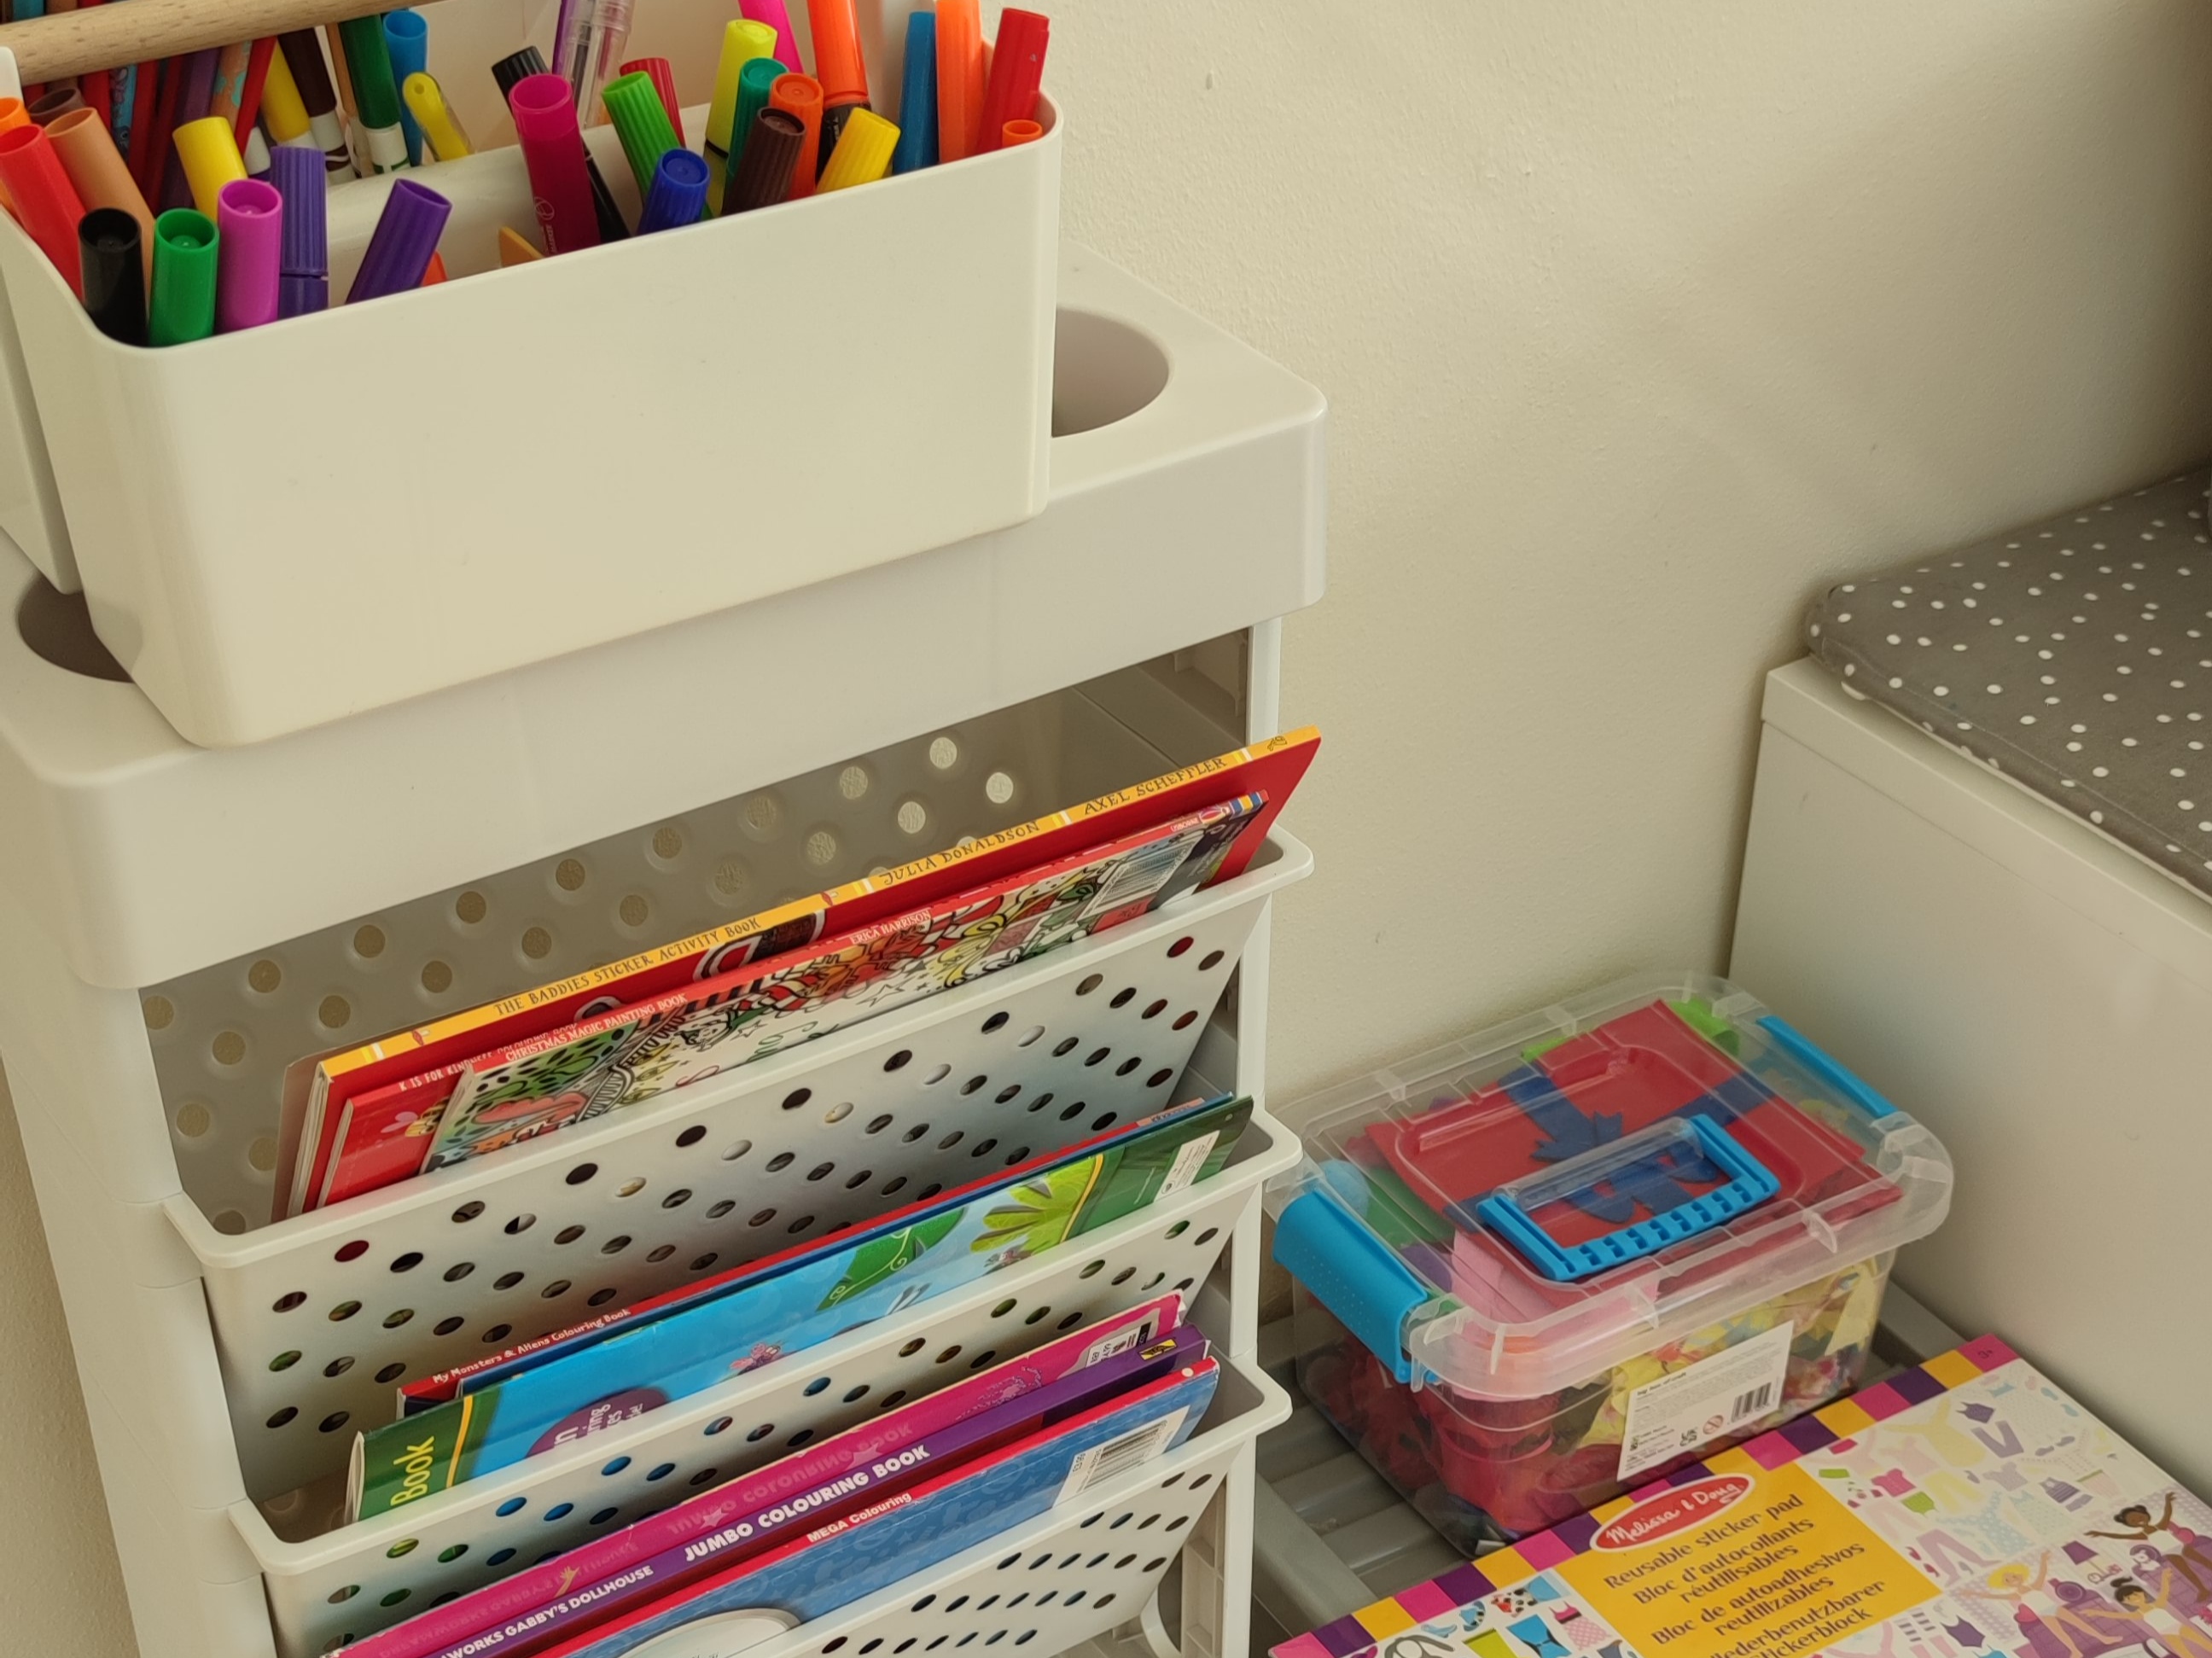 Storage shelves with colourful art supplies and a storage caddy containing colouring books and educational materials, arranged next to a dotted cushion.